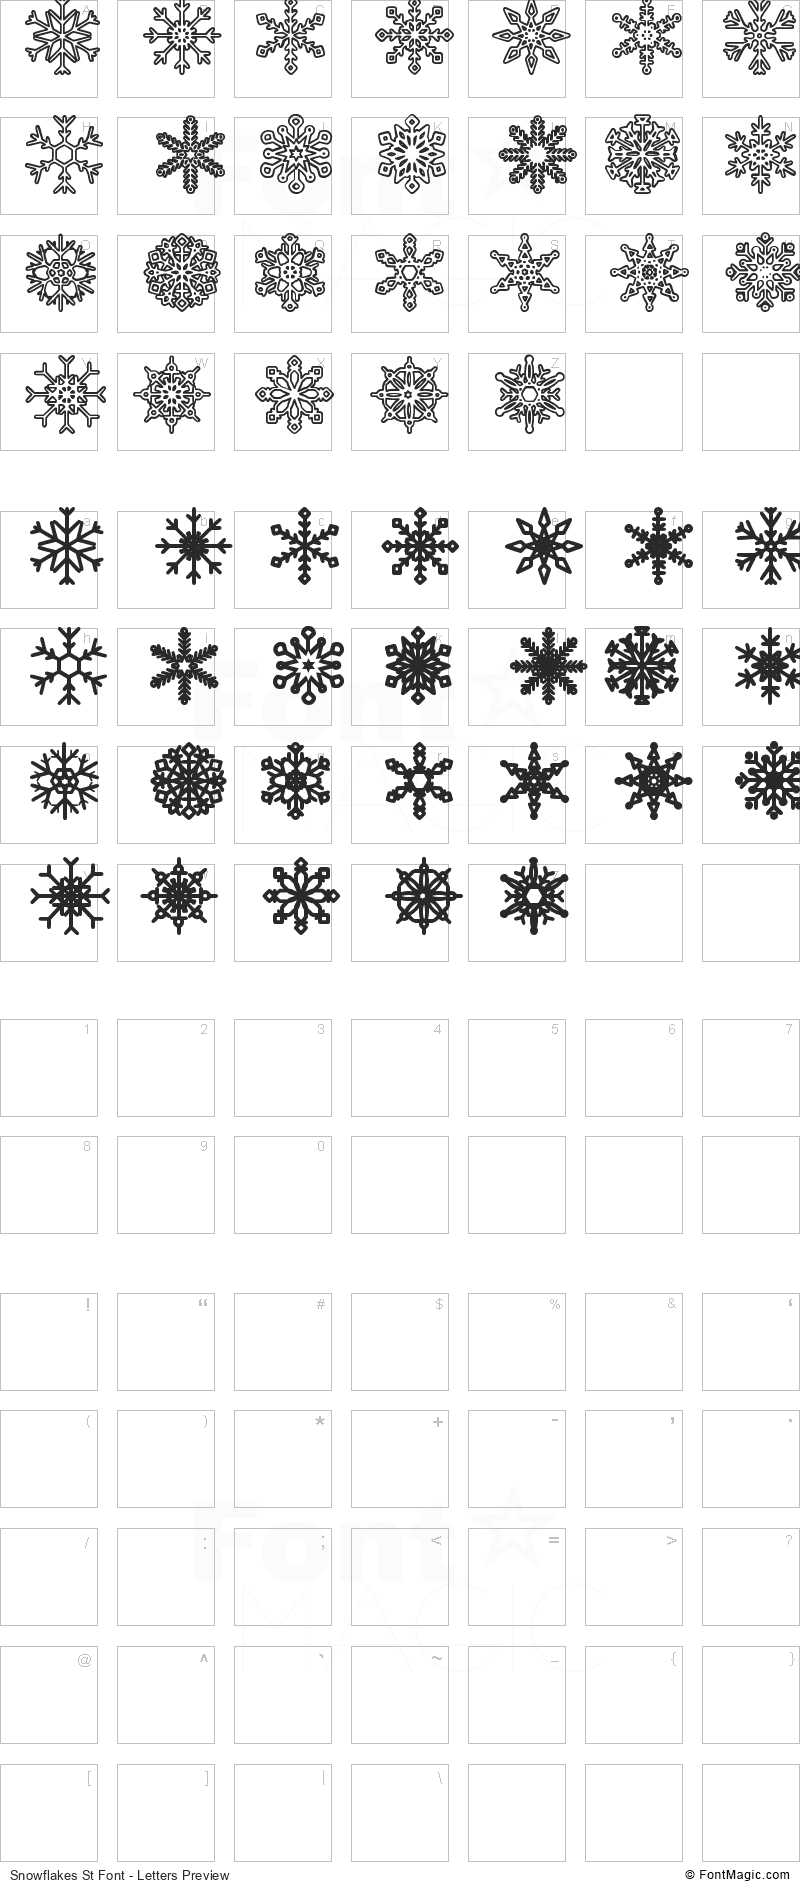 Snowflakes St Font - All Latters Preview Chart